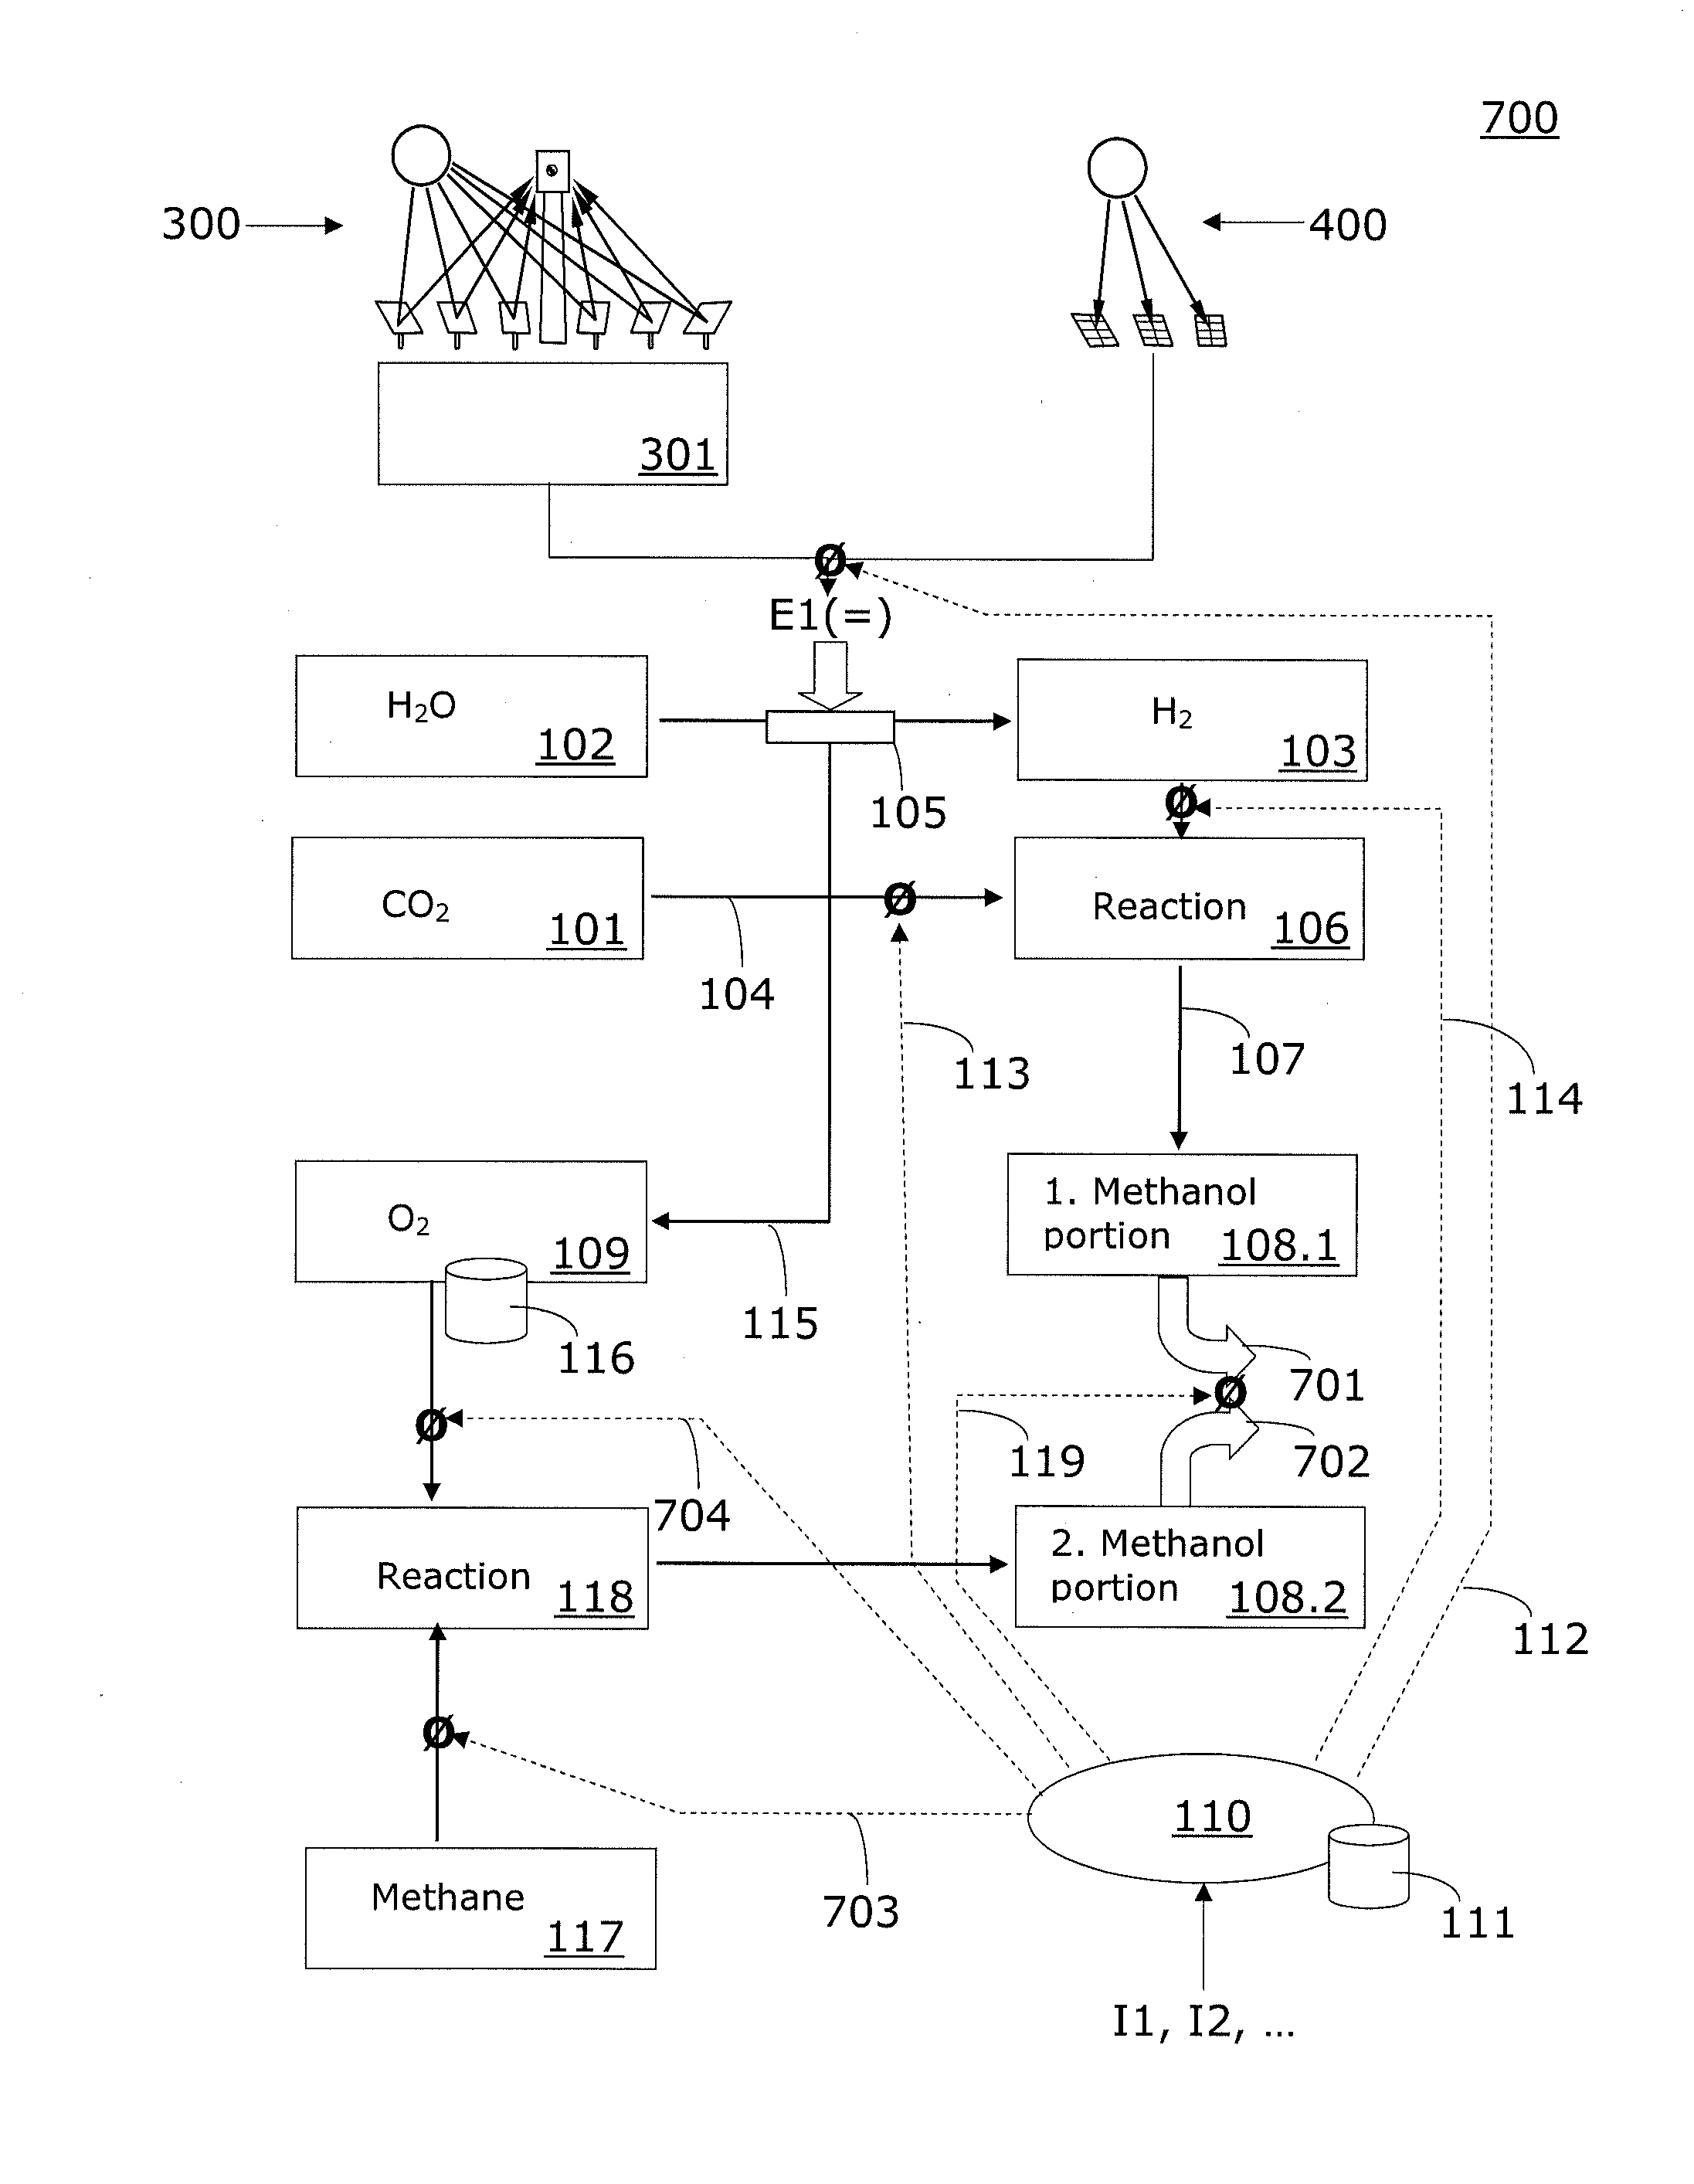 Method and system for providing a hydrocarbon-based energy carrier using a portion of renewably produced methanol and a portion of methanol that is produced by means of direct oxidation, partial oxidation, or reforming